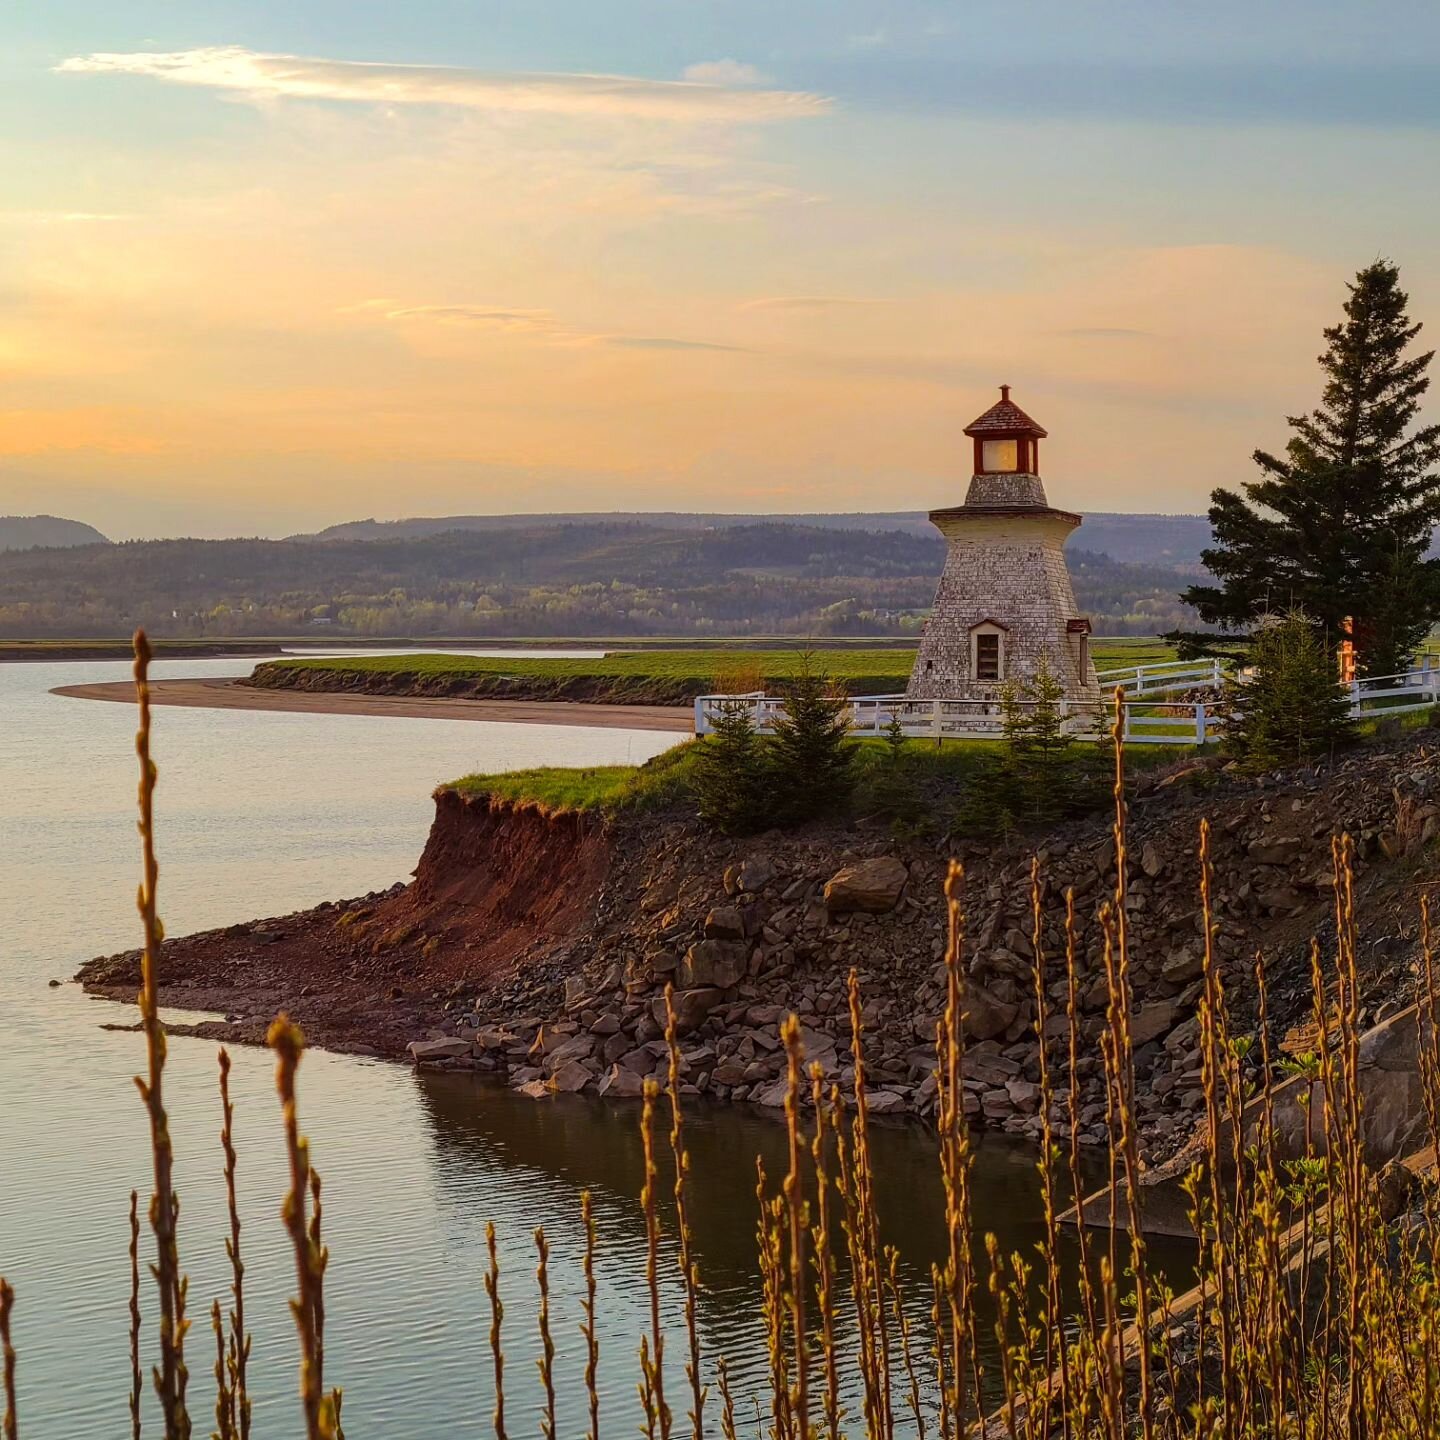 Anderson Hollow Lighthouse. The 1903 iteration of a light tower initially erected in 1889 at Anderson&rsquo;s Hollow, Chignecto Channel
.
The first two lighthouses were destroyed by storms. This tower remained until circa 1949
.
Since then, it's been